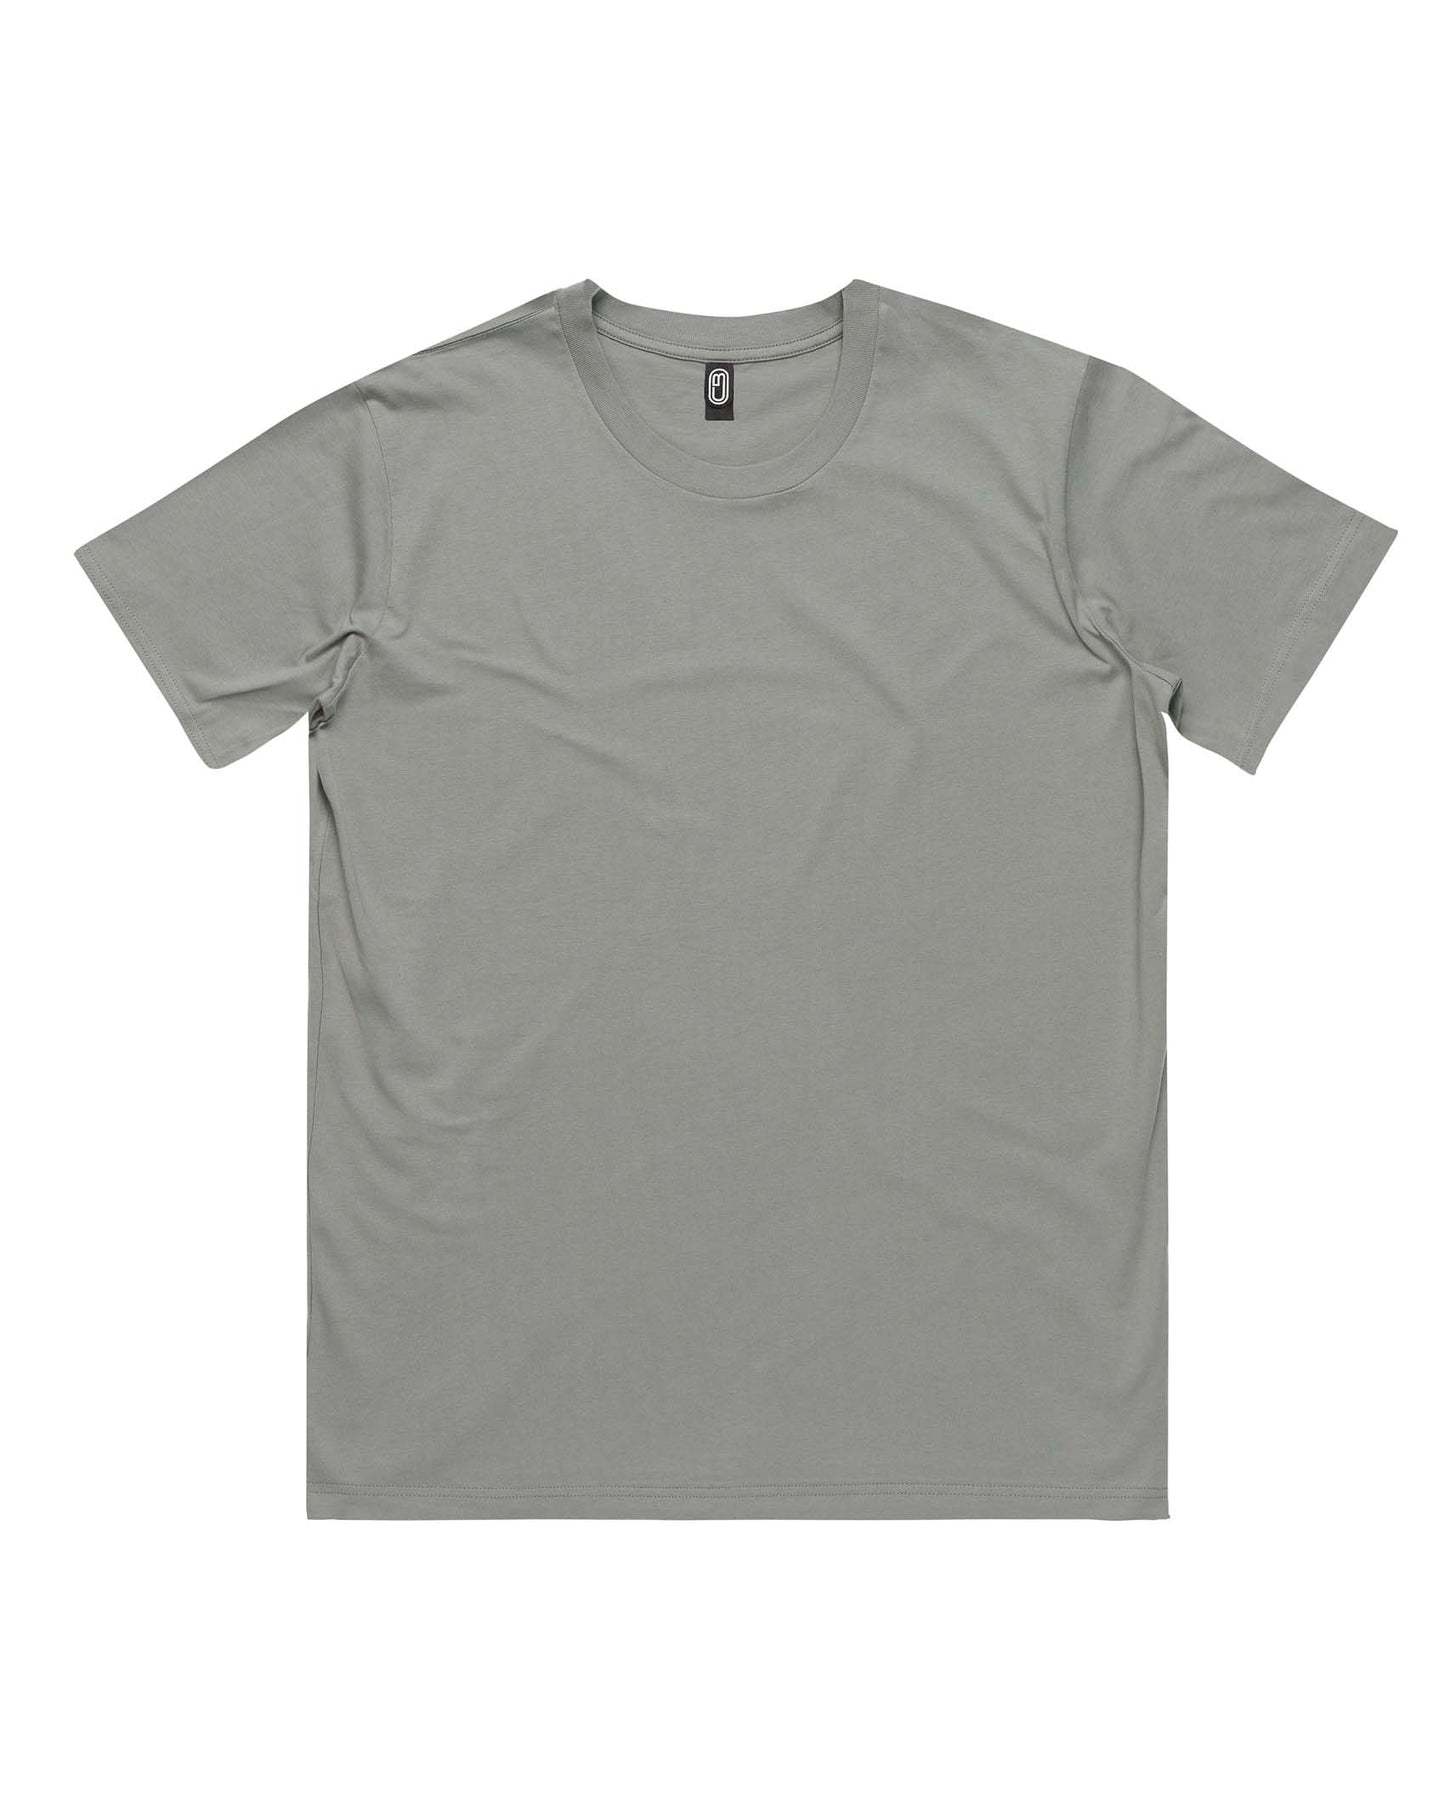 Mens Classic T-shirt - Package of 10